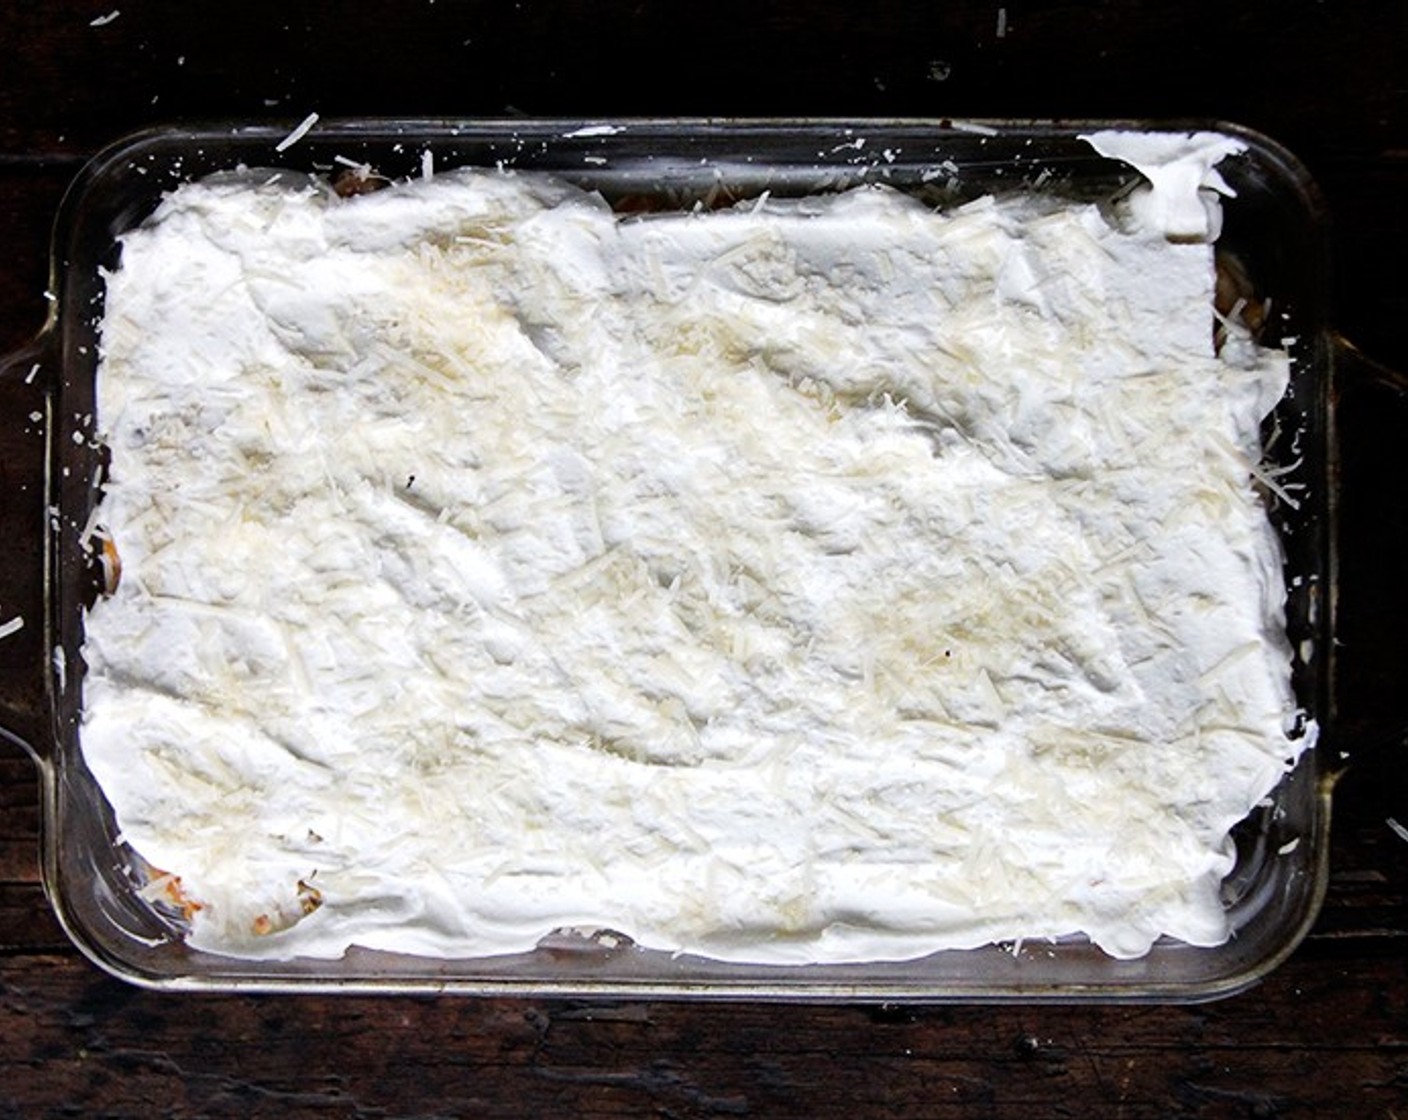 step 12 Sprinkle remaining Parmesan Cheese (1/3 cup) over cream. Cover dish tightly with foil, tenting slightly to prevent foil from touching top layer, and bake in middle of oven 30 minutes.